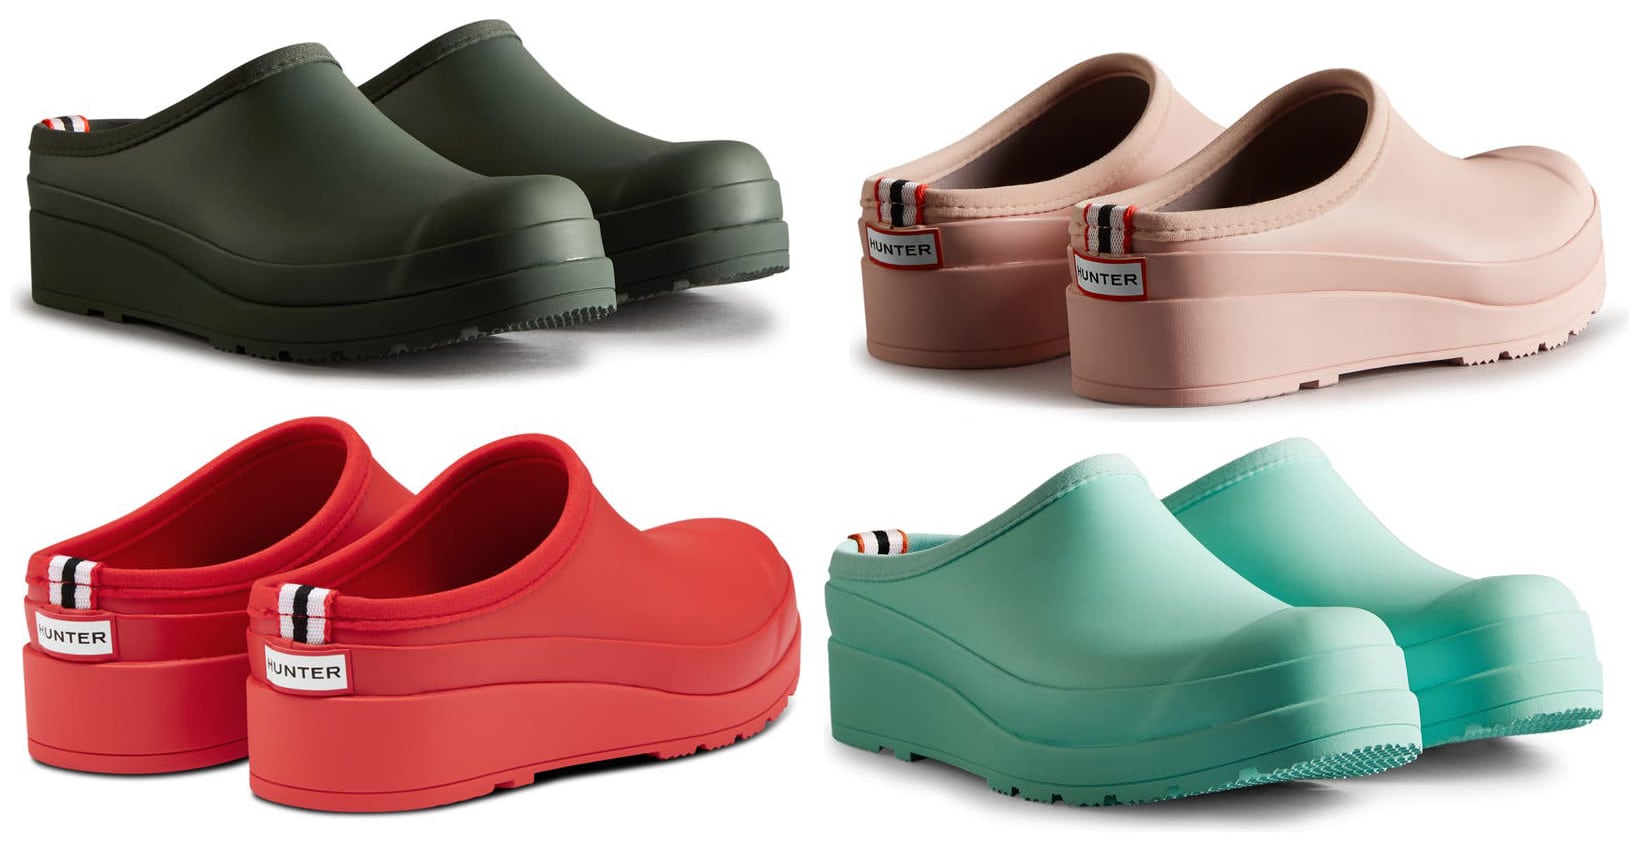 Hunter's comfy lightweight clogs are water-resistant and have soft lining and textured soles